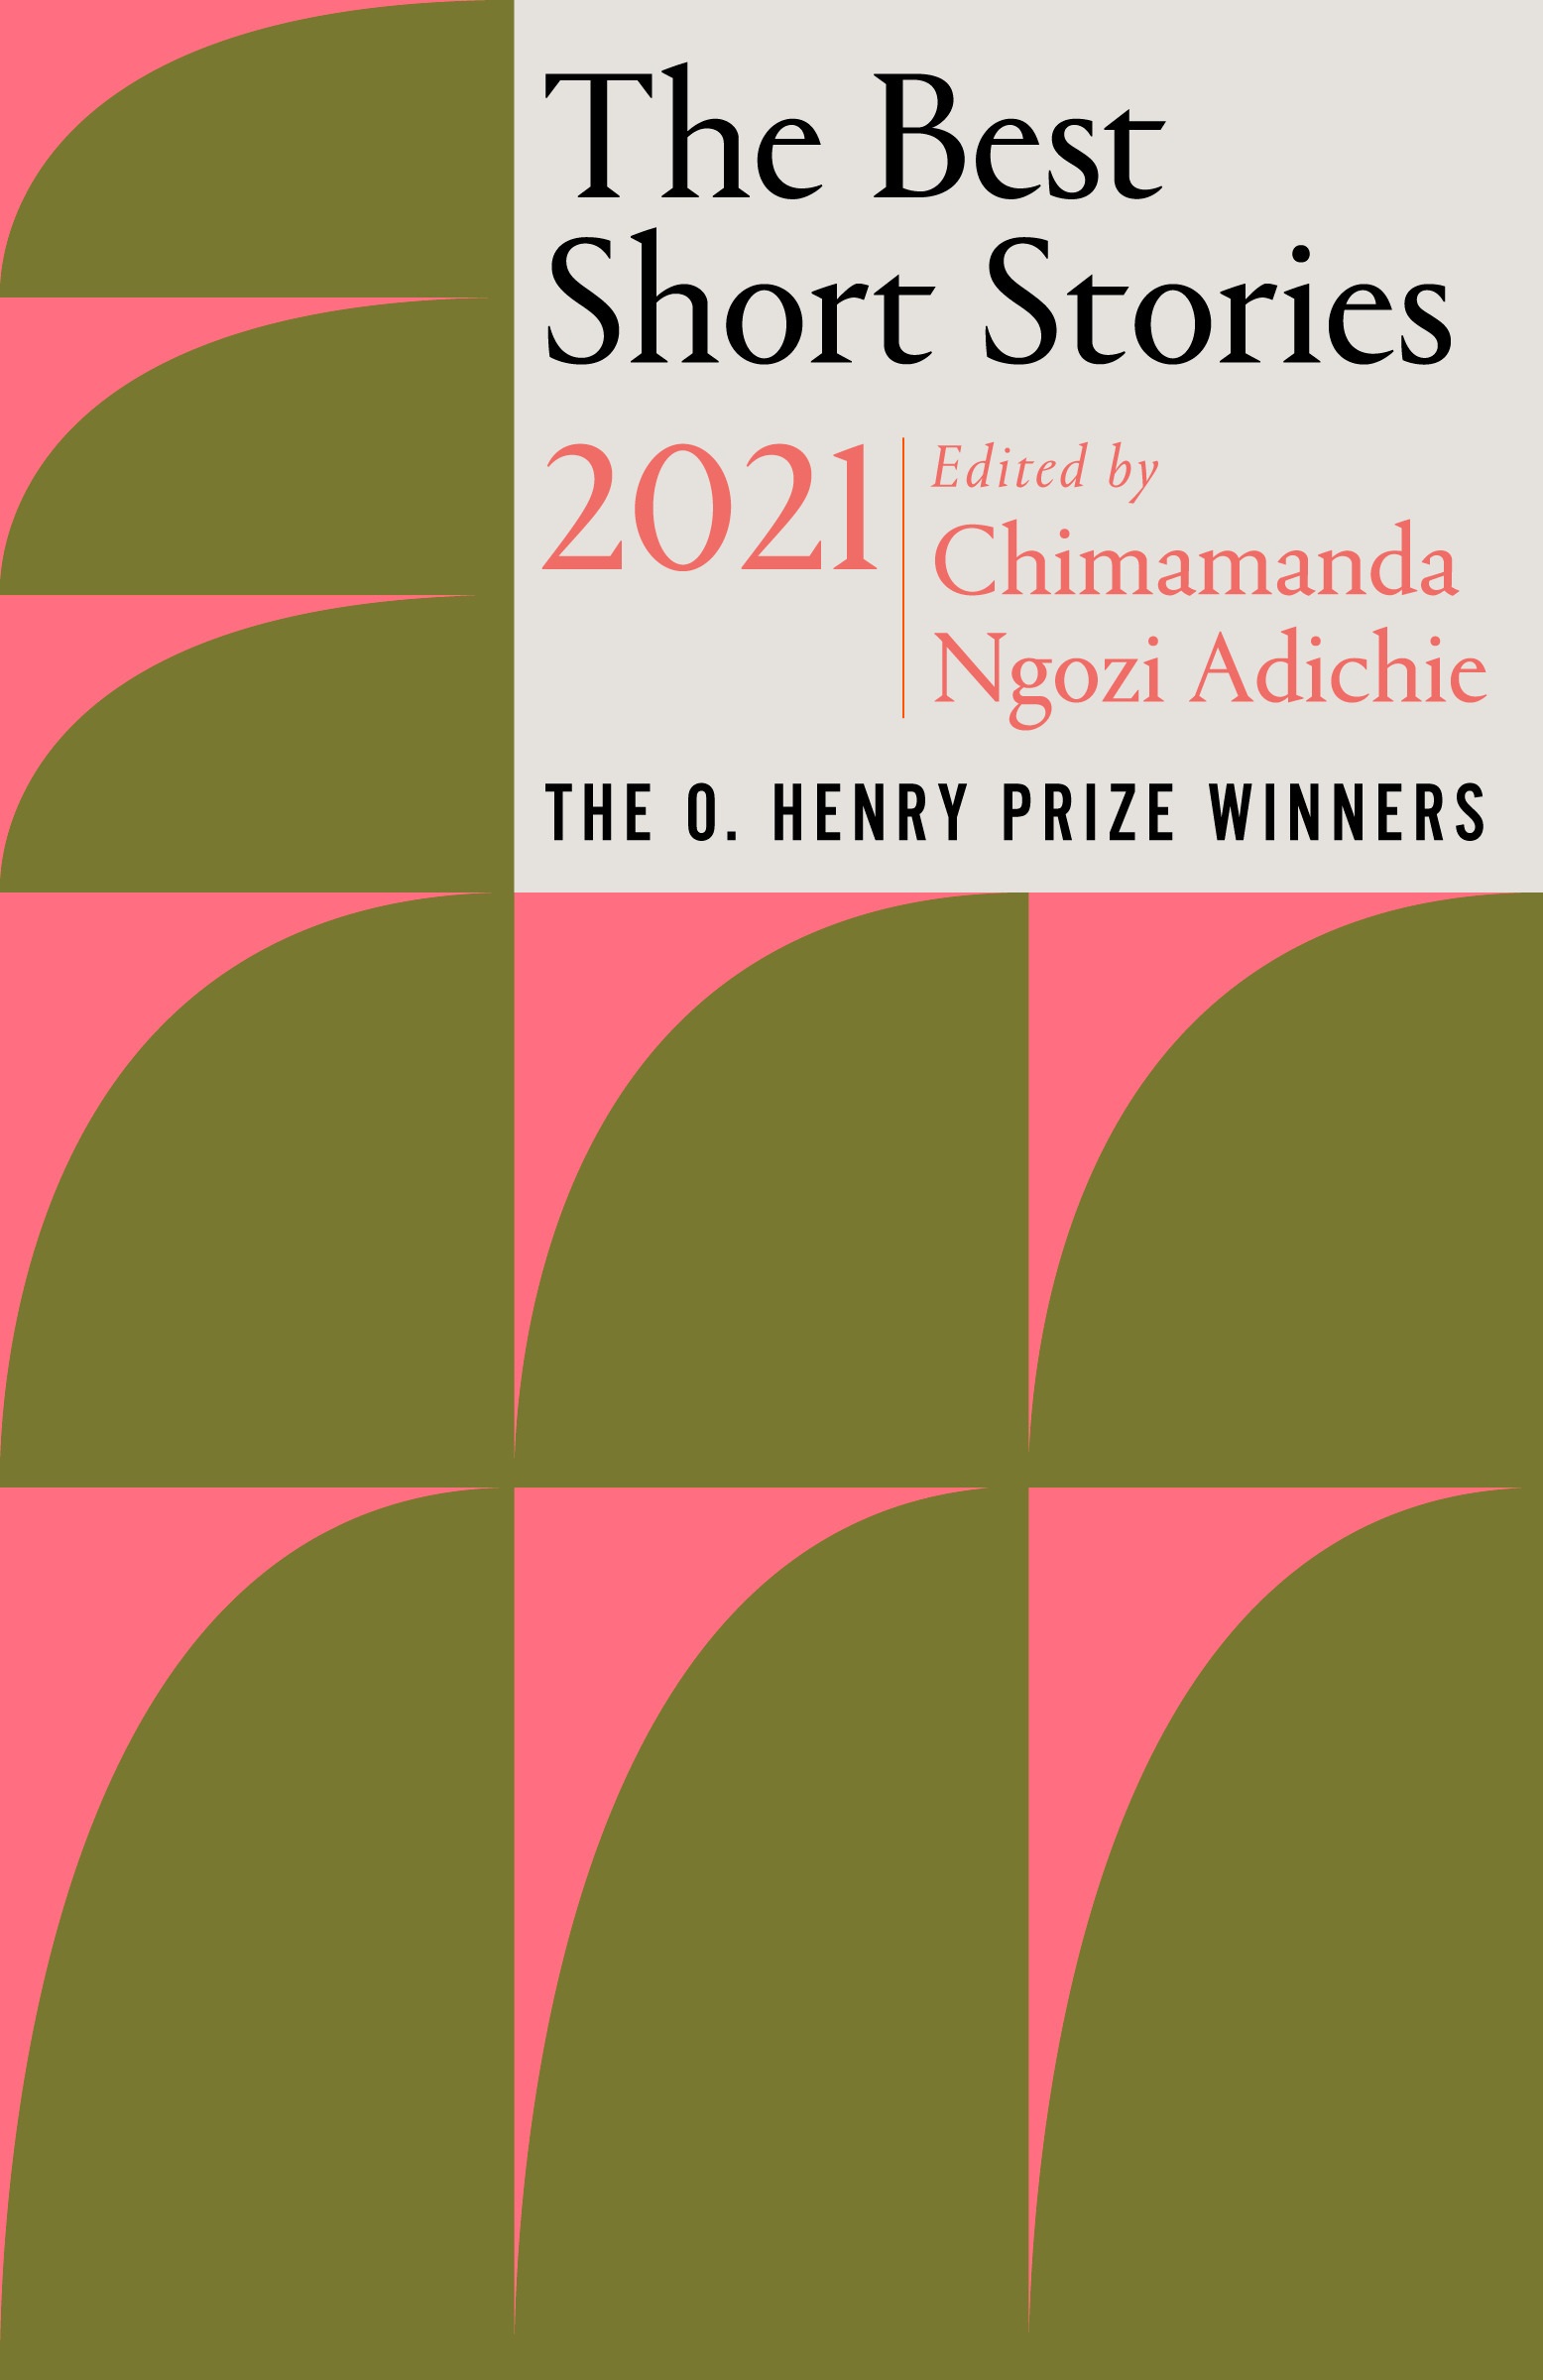 Virtual Book Launch: The Best Short Stories 2021 with guest editor Chimamanda Ngozi Adichie and editor Jenny Minton Quigley